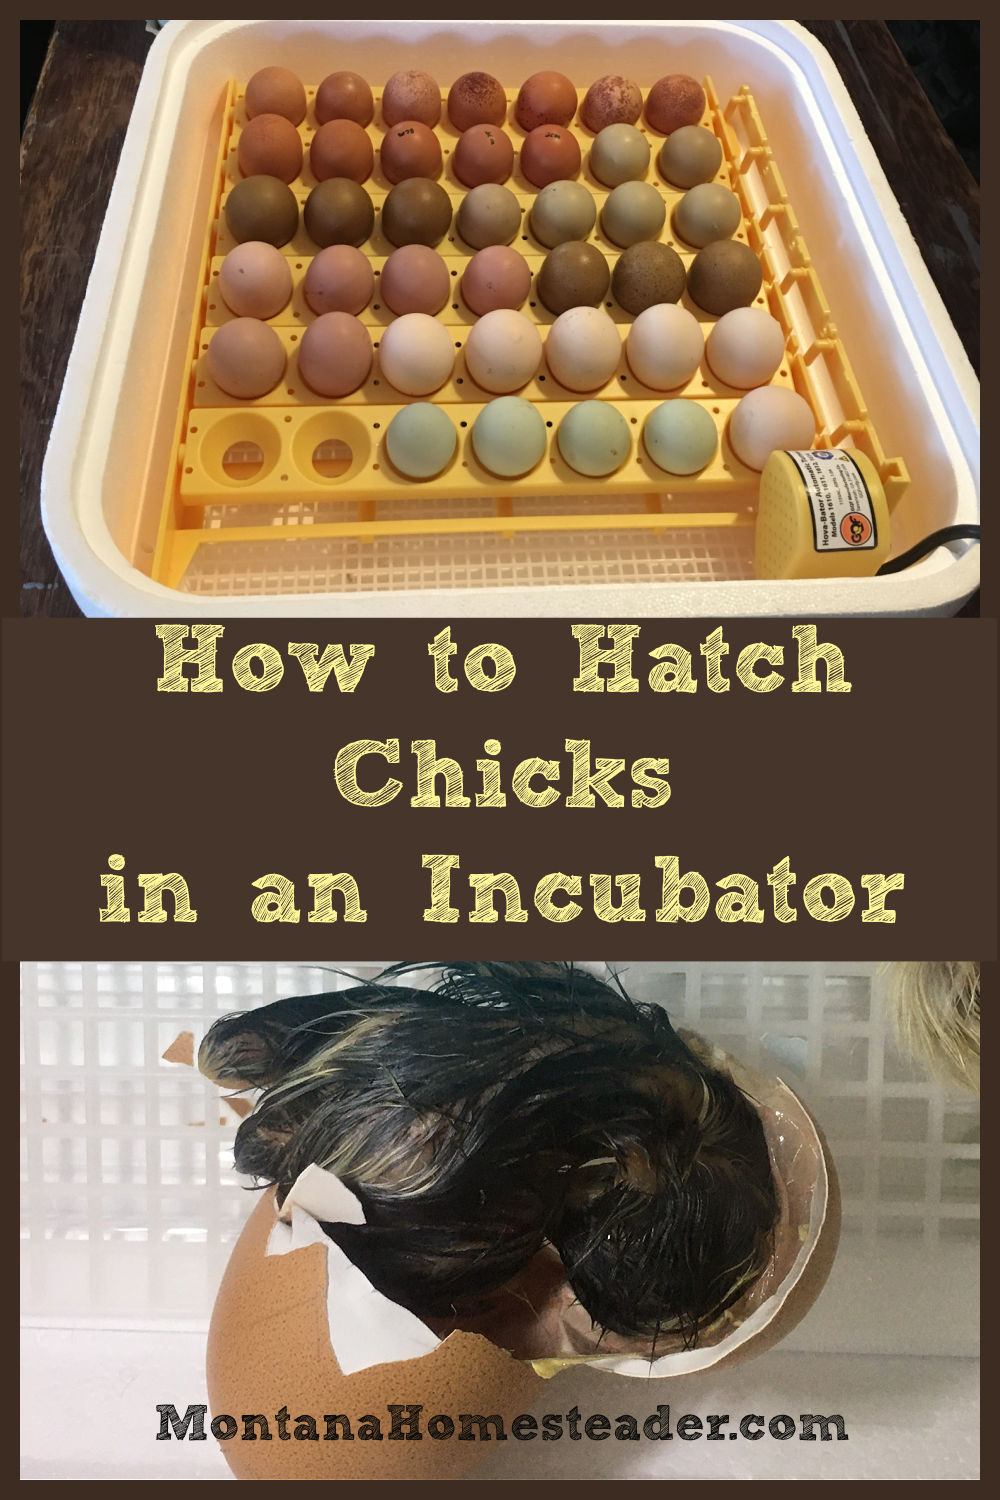 Hatching chicks in an incubator